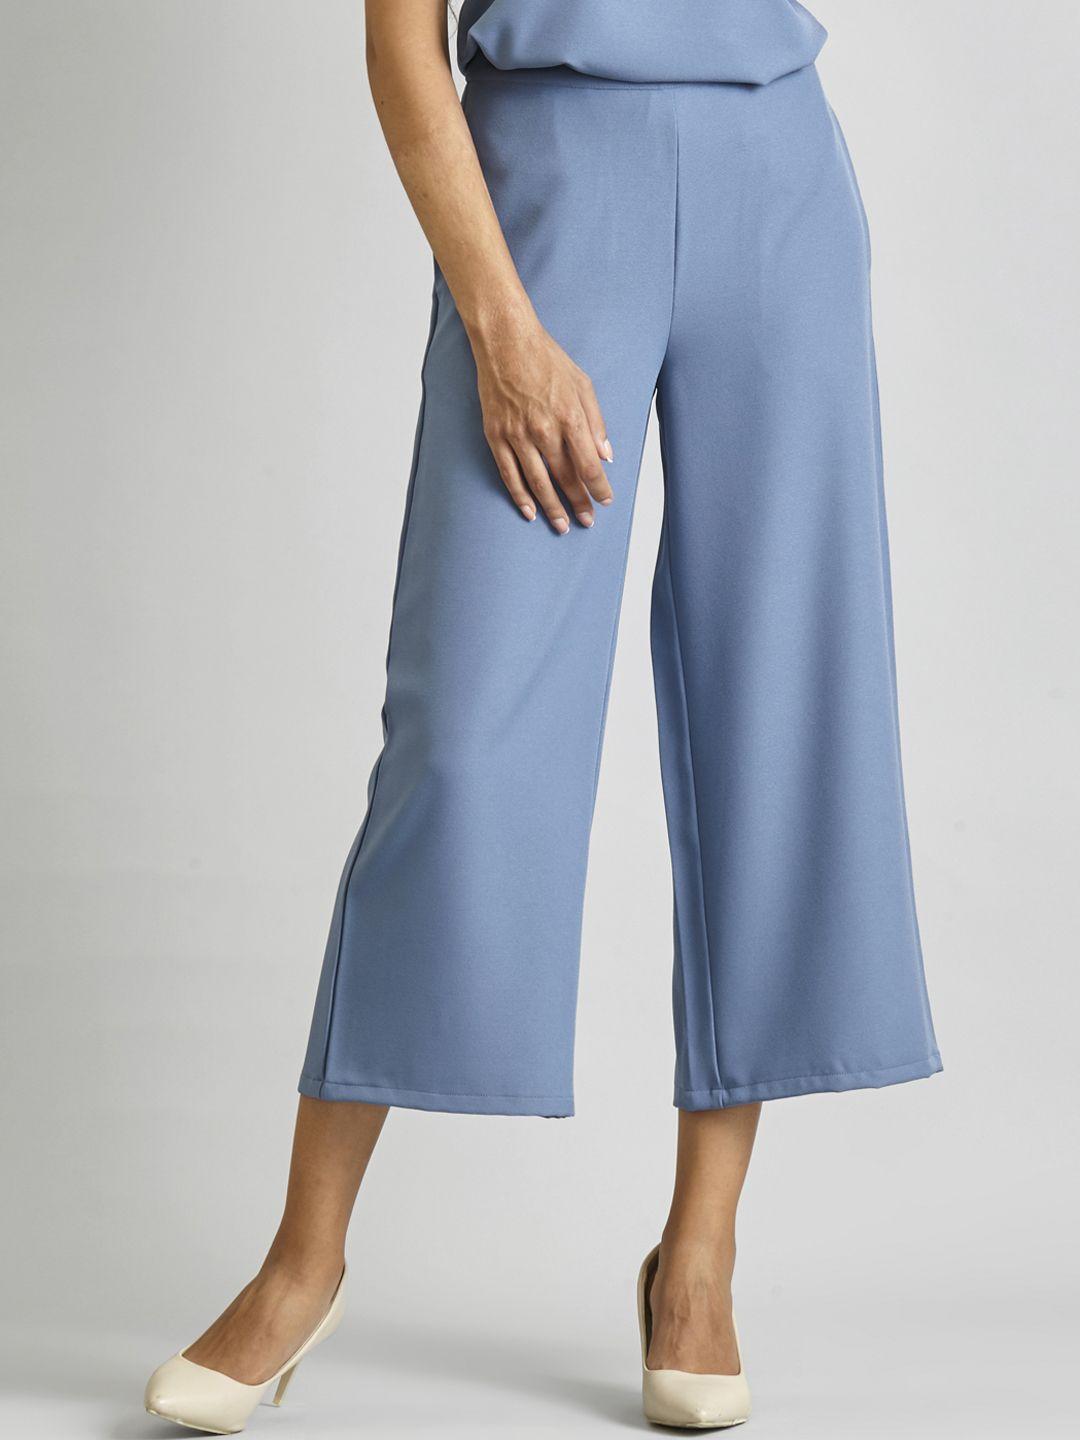 fablestreet women blue flared solid culottes